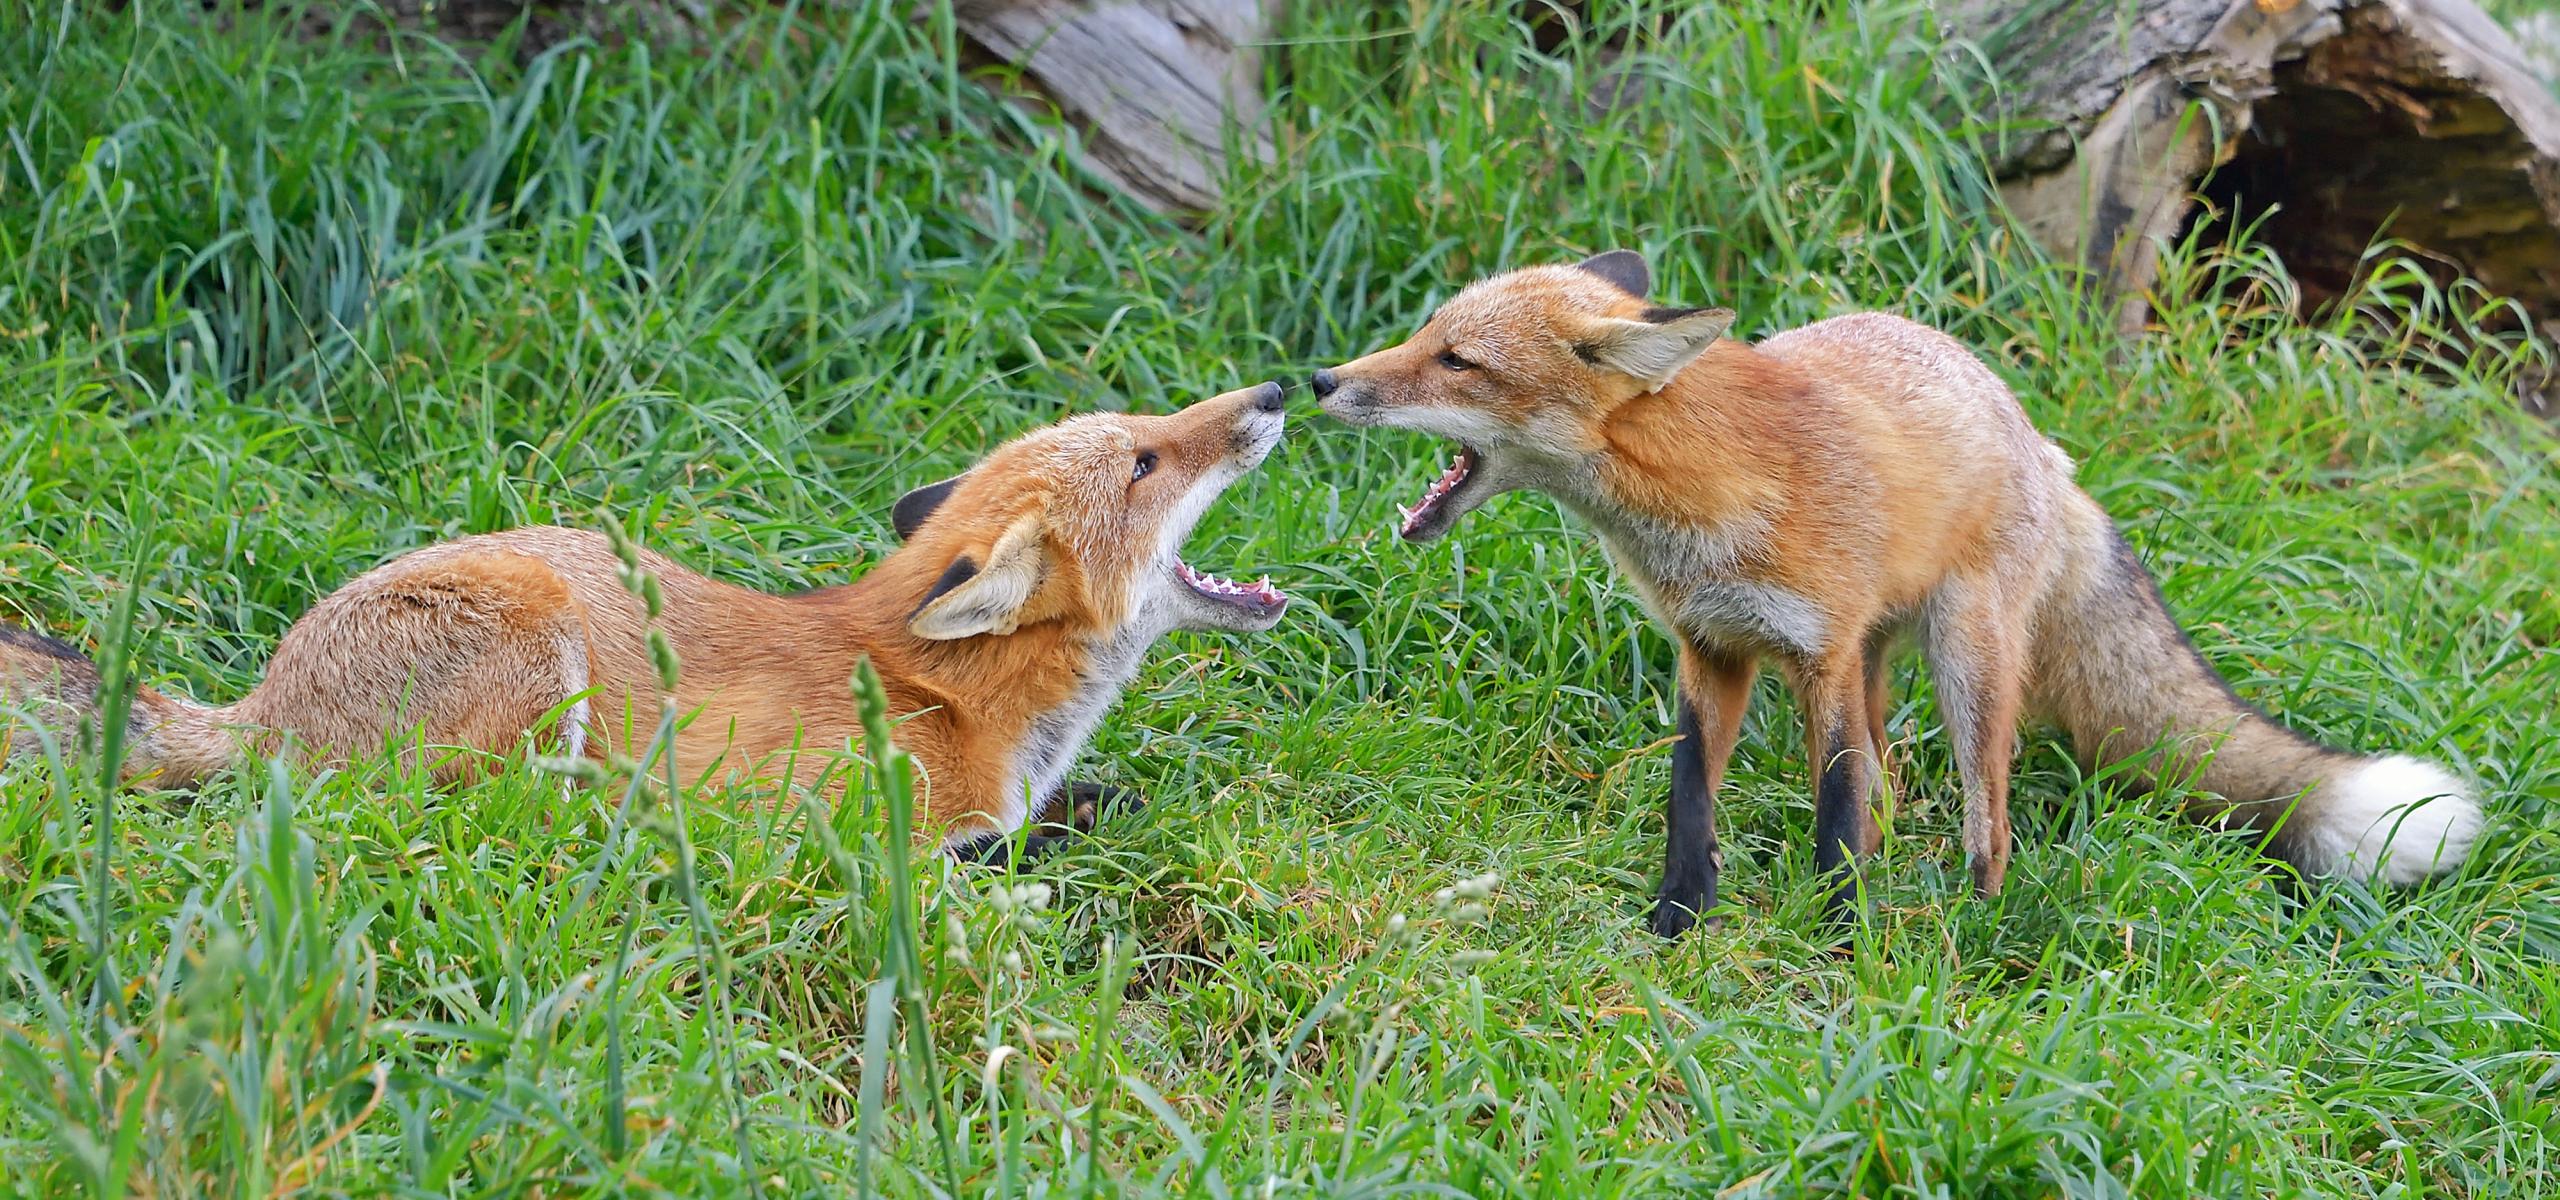 Two foxes standing in the grass